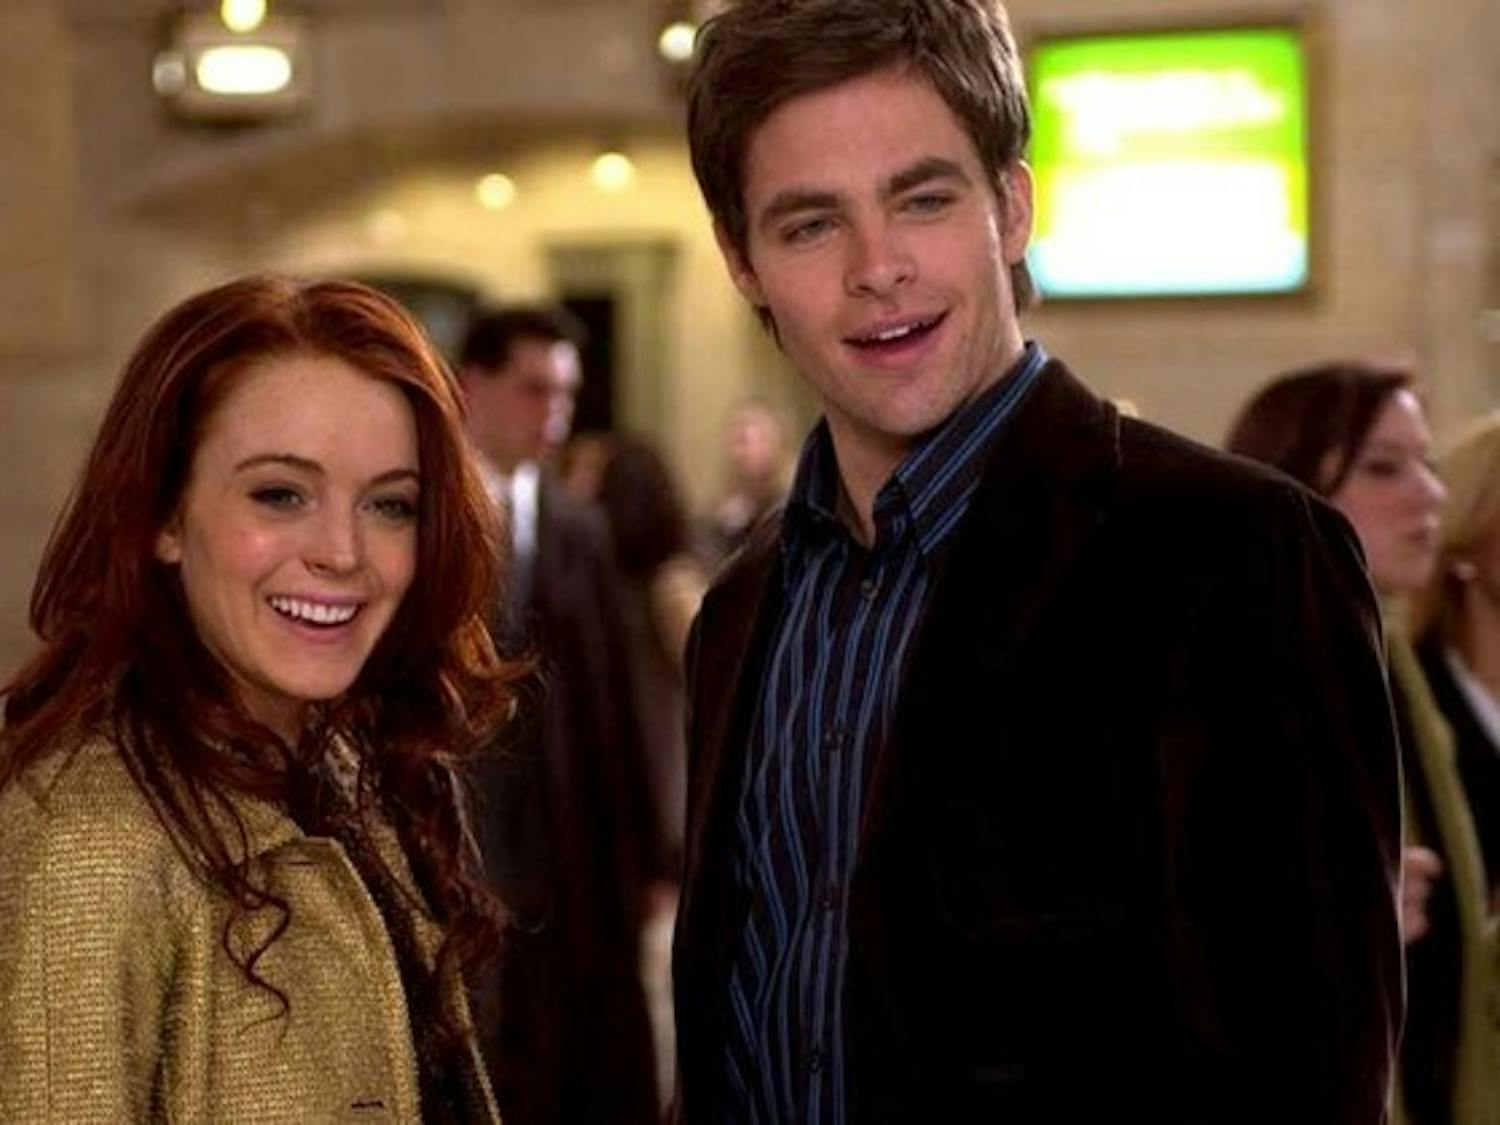 Lindsay Lohan and Chris Pine swap fortunes in 